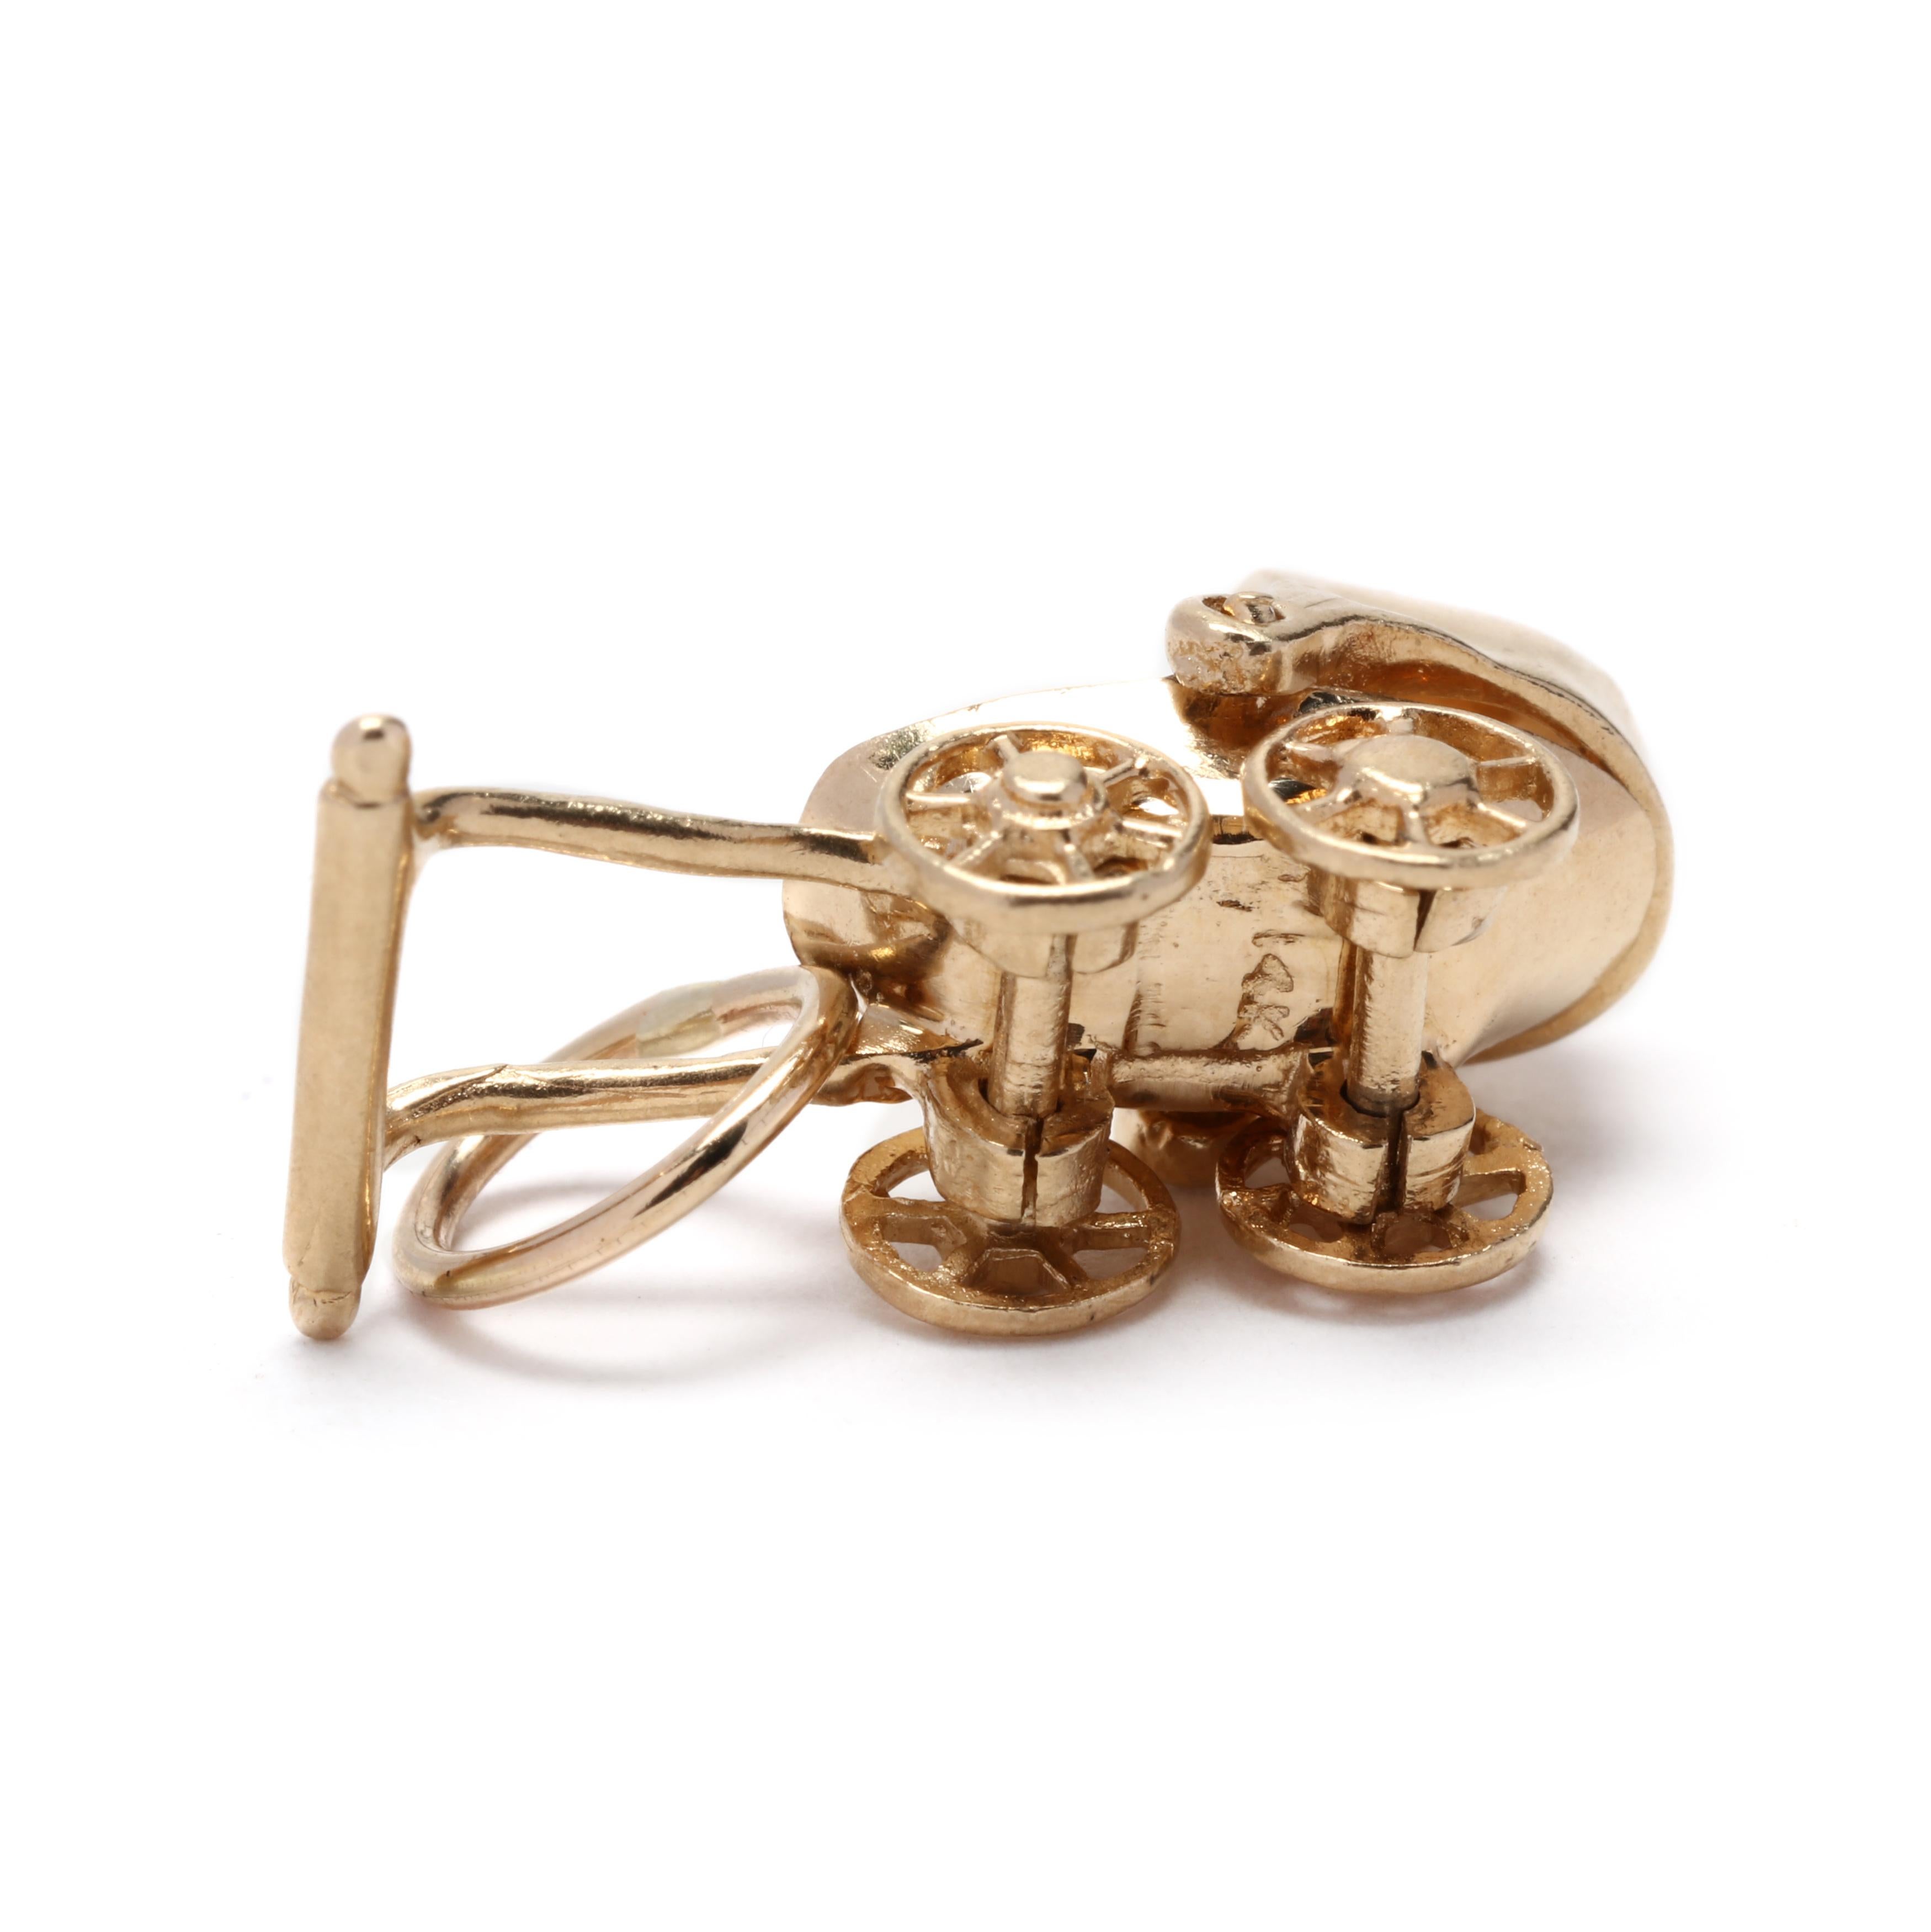 Retro 14K Yellow Gold Baby Carriage Charm